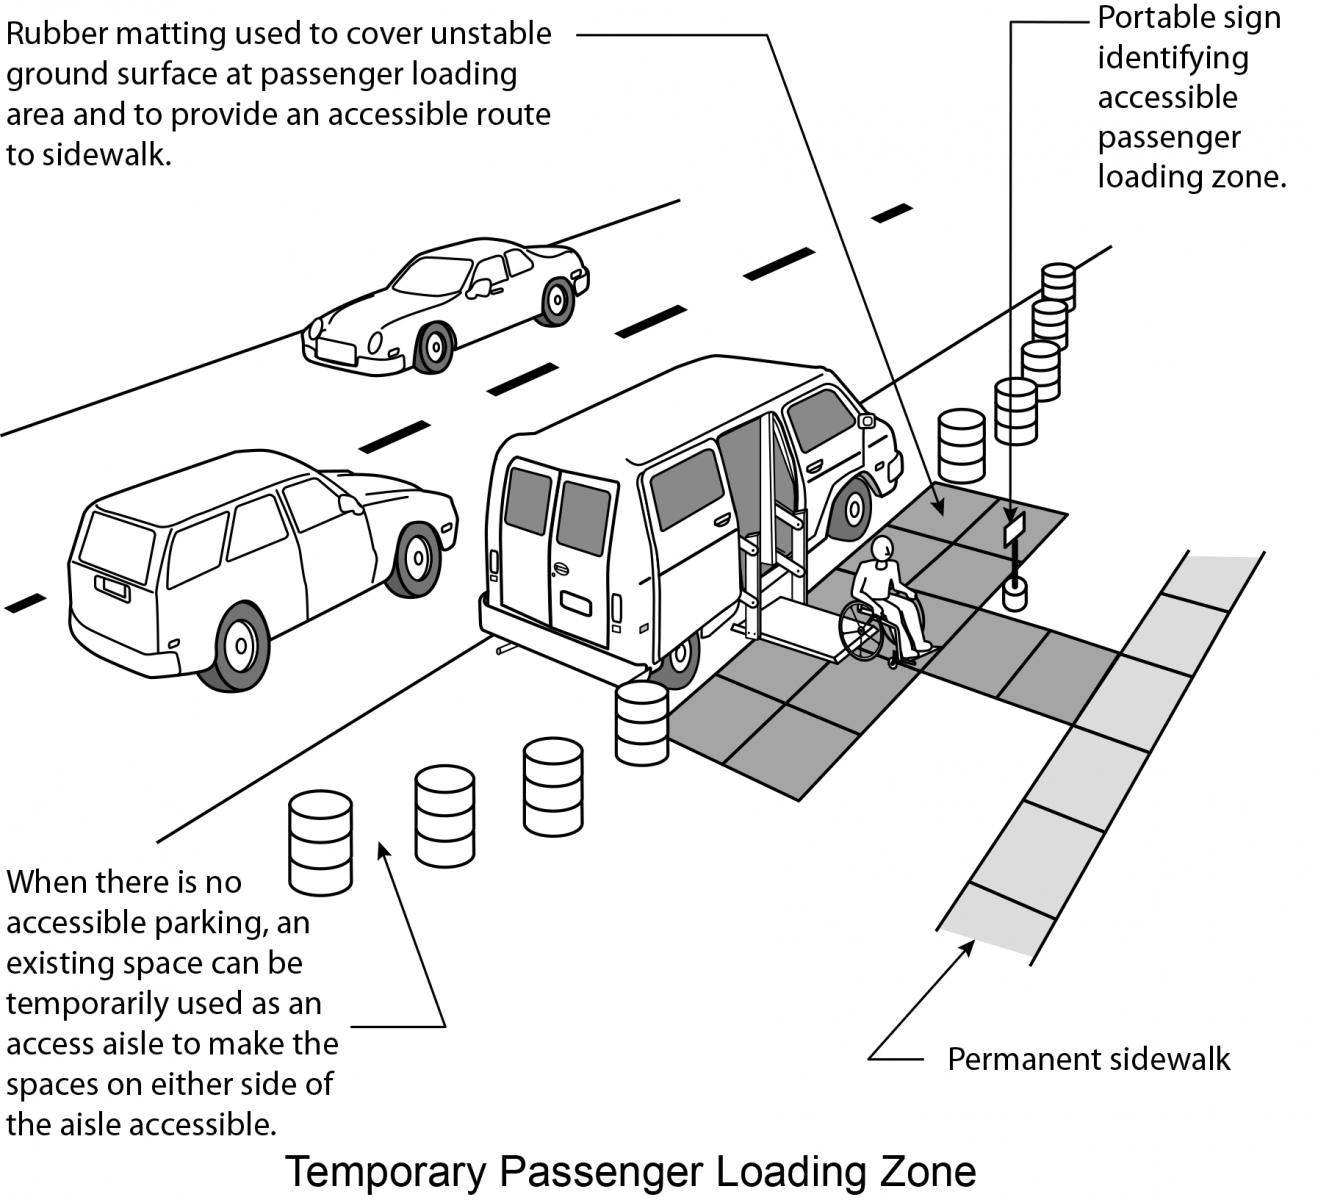 Figure 10: An existing space is blocked off with barrels. Rubber matting covers unstable ground surface at passenger loading area to provide an accessible route to the sidewalk. A portable sign identifies the accessible loading zone.